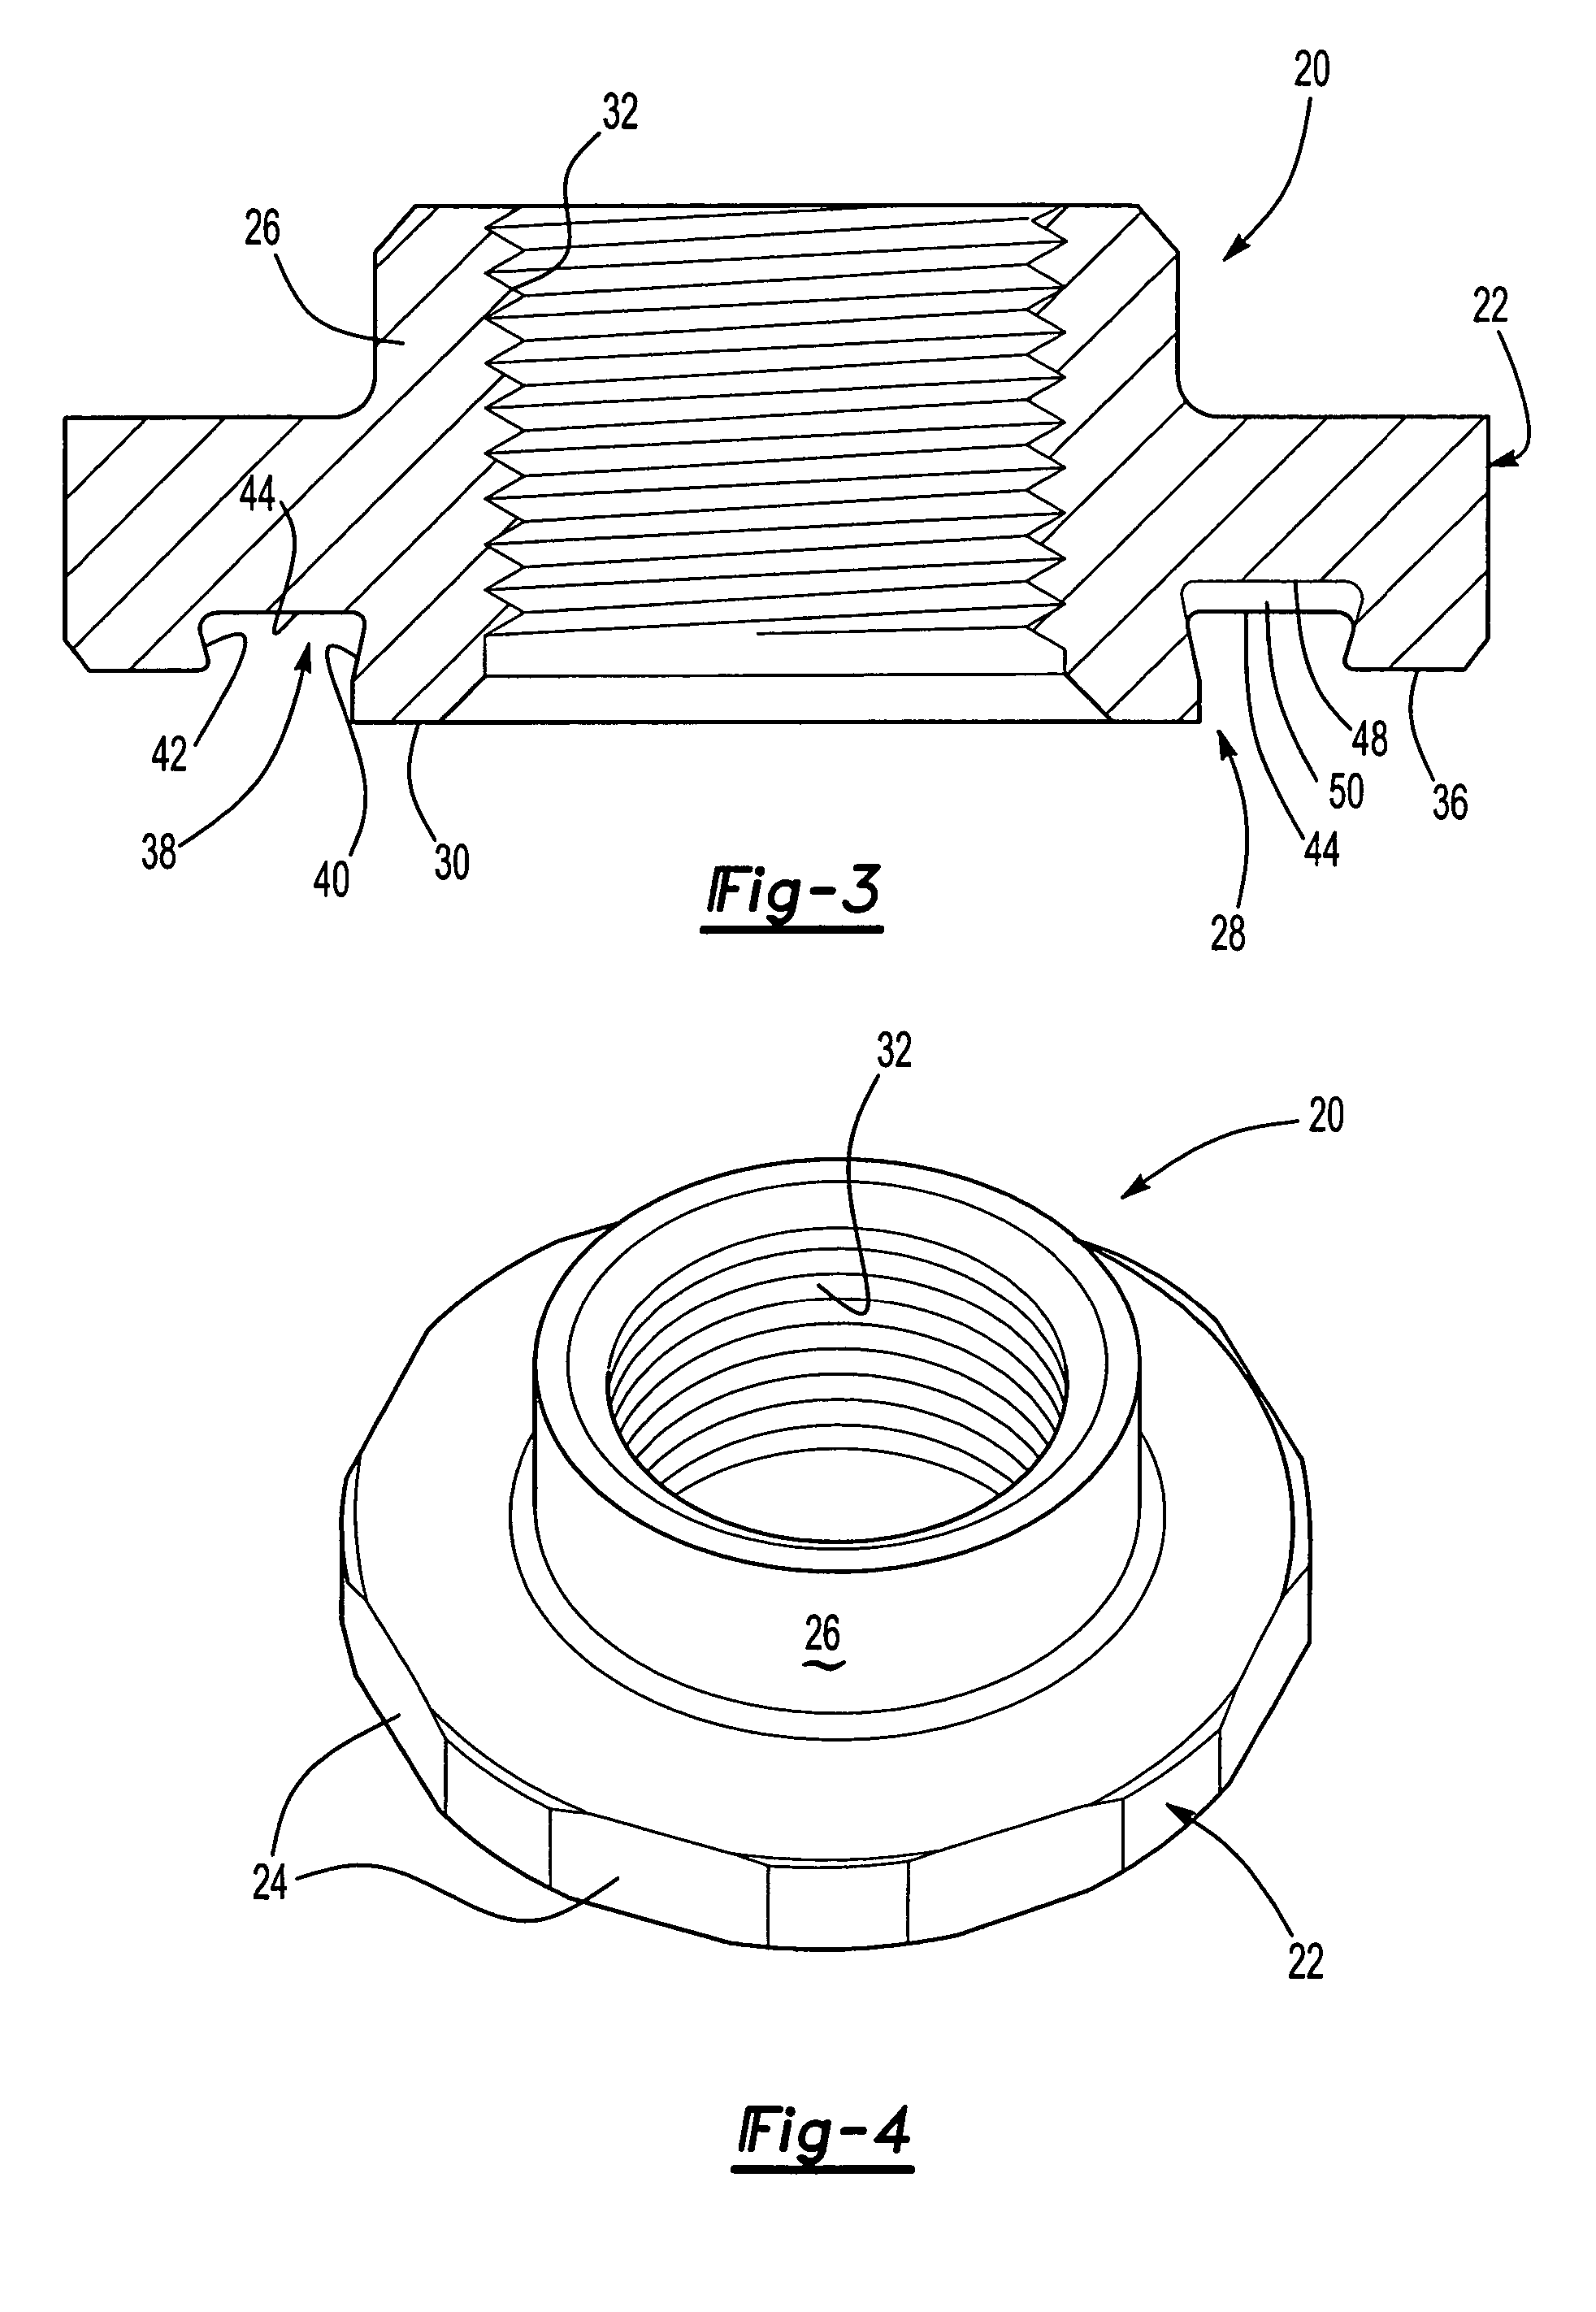 Self-attaching female fastener element, sealed fastener and panel assembly and method of forming same